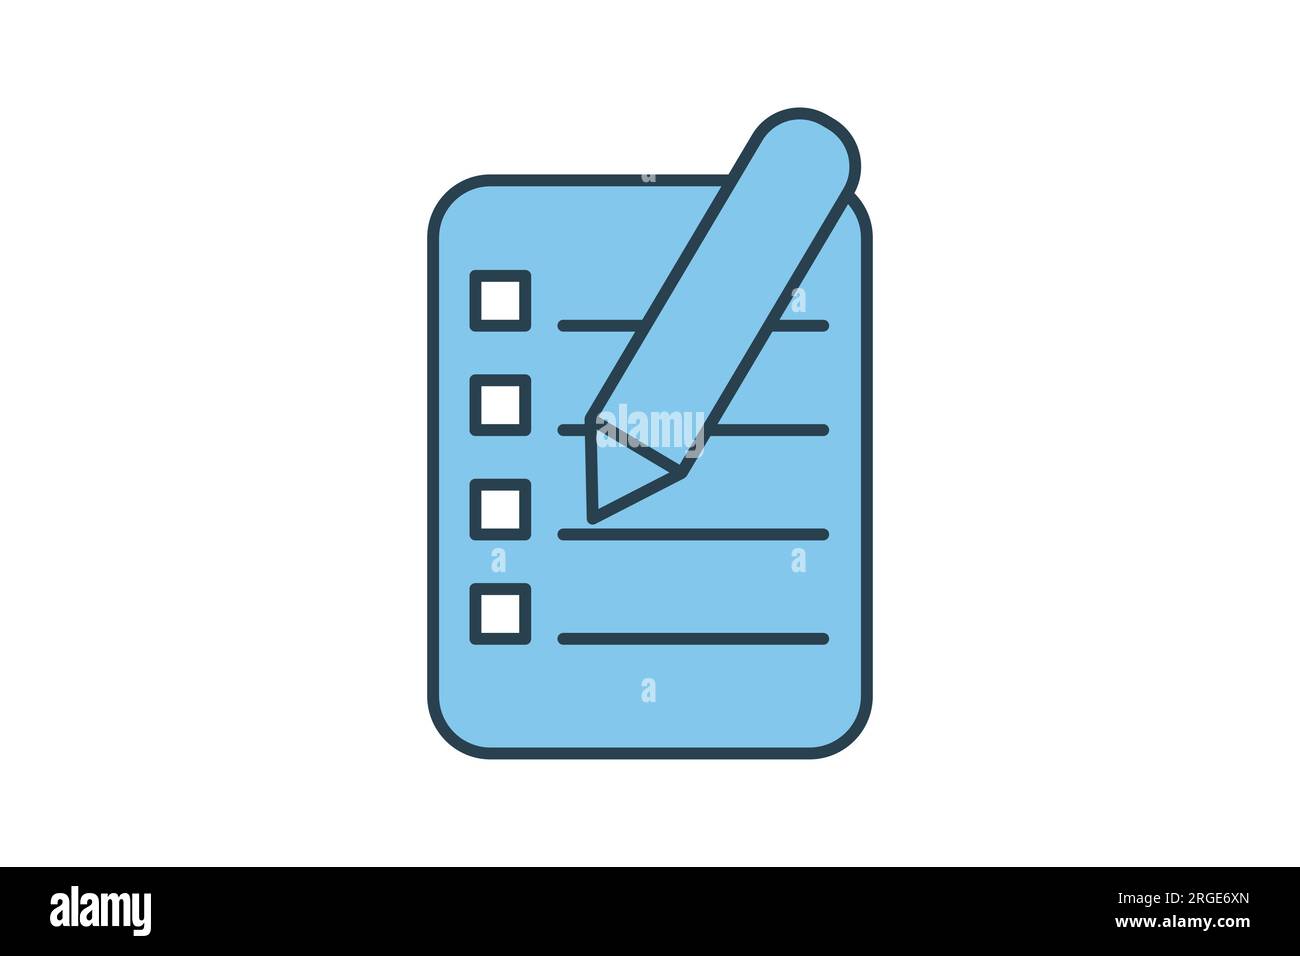 Feedback Form Icon. Icon related to survey. flat line icon style. Simple vector design editable Stock Vector